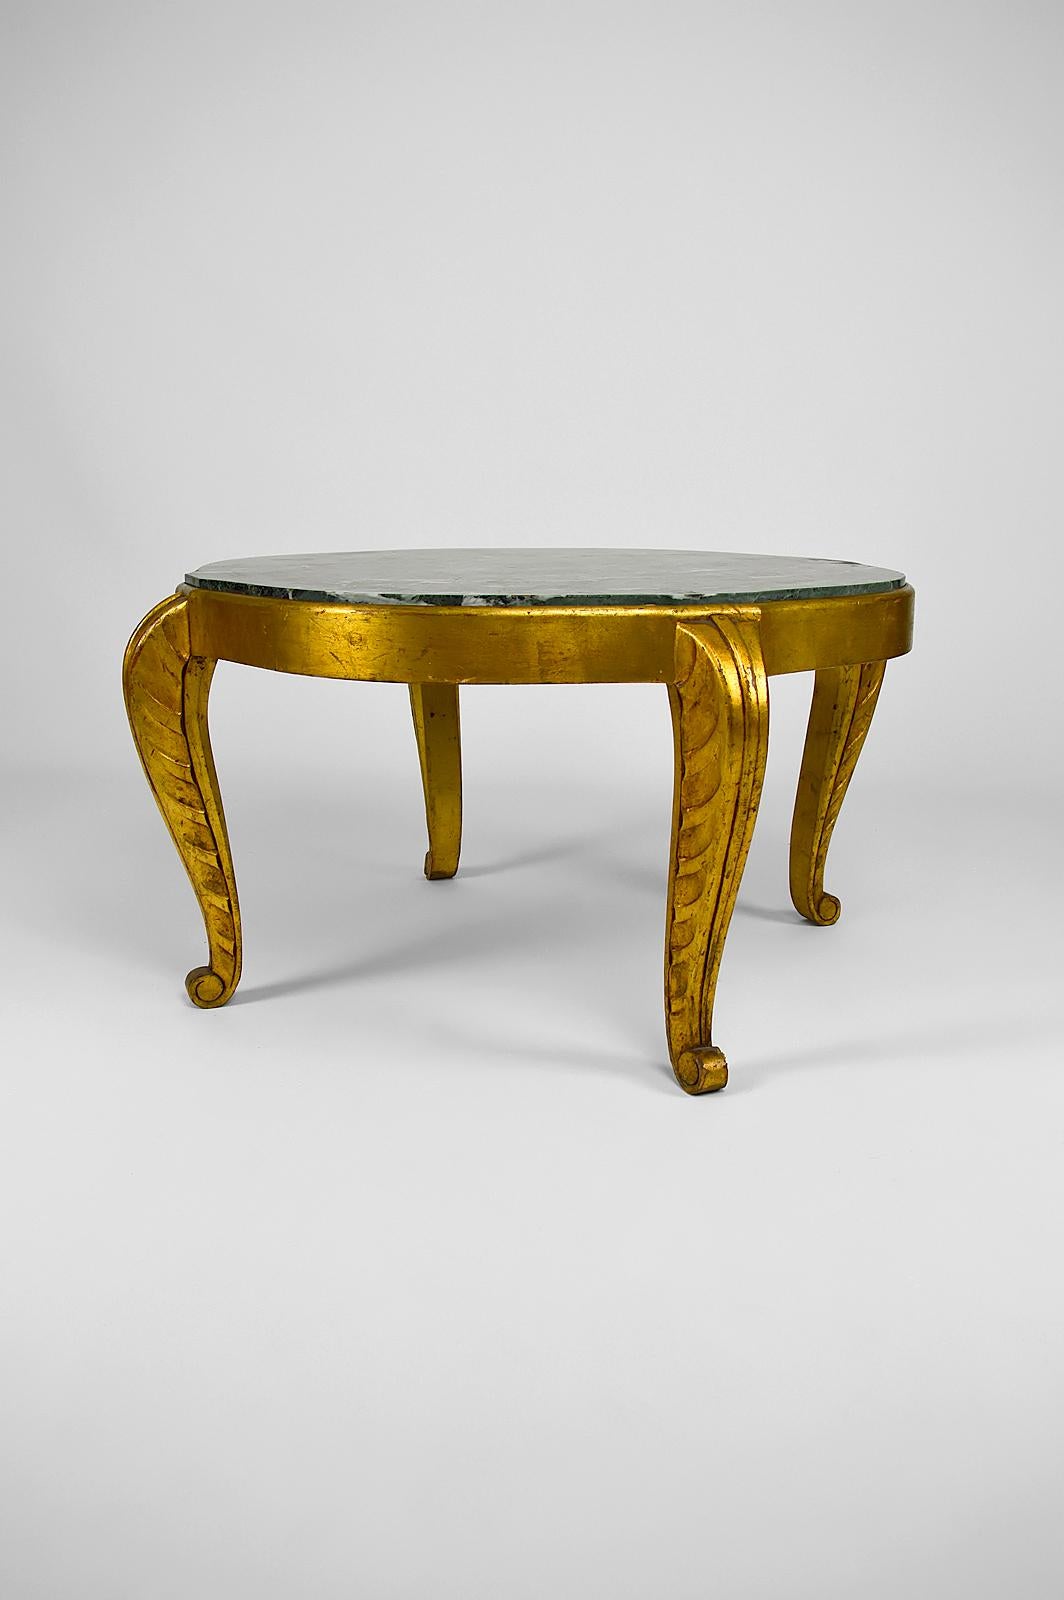 Gilt Gilded Side Table with Marble Top by Maison Jansen, Neoclassical Art Deco, 1940s For Sale